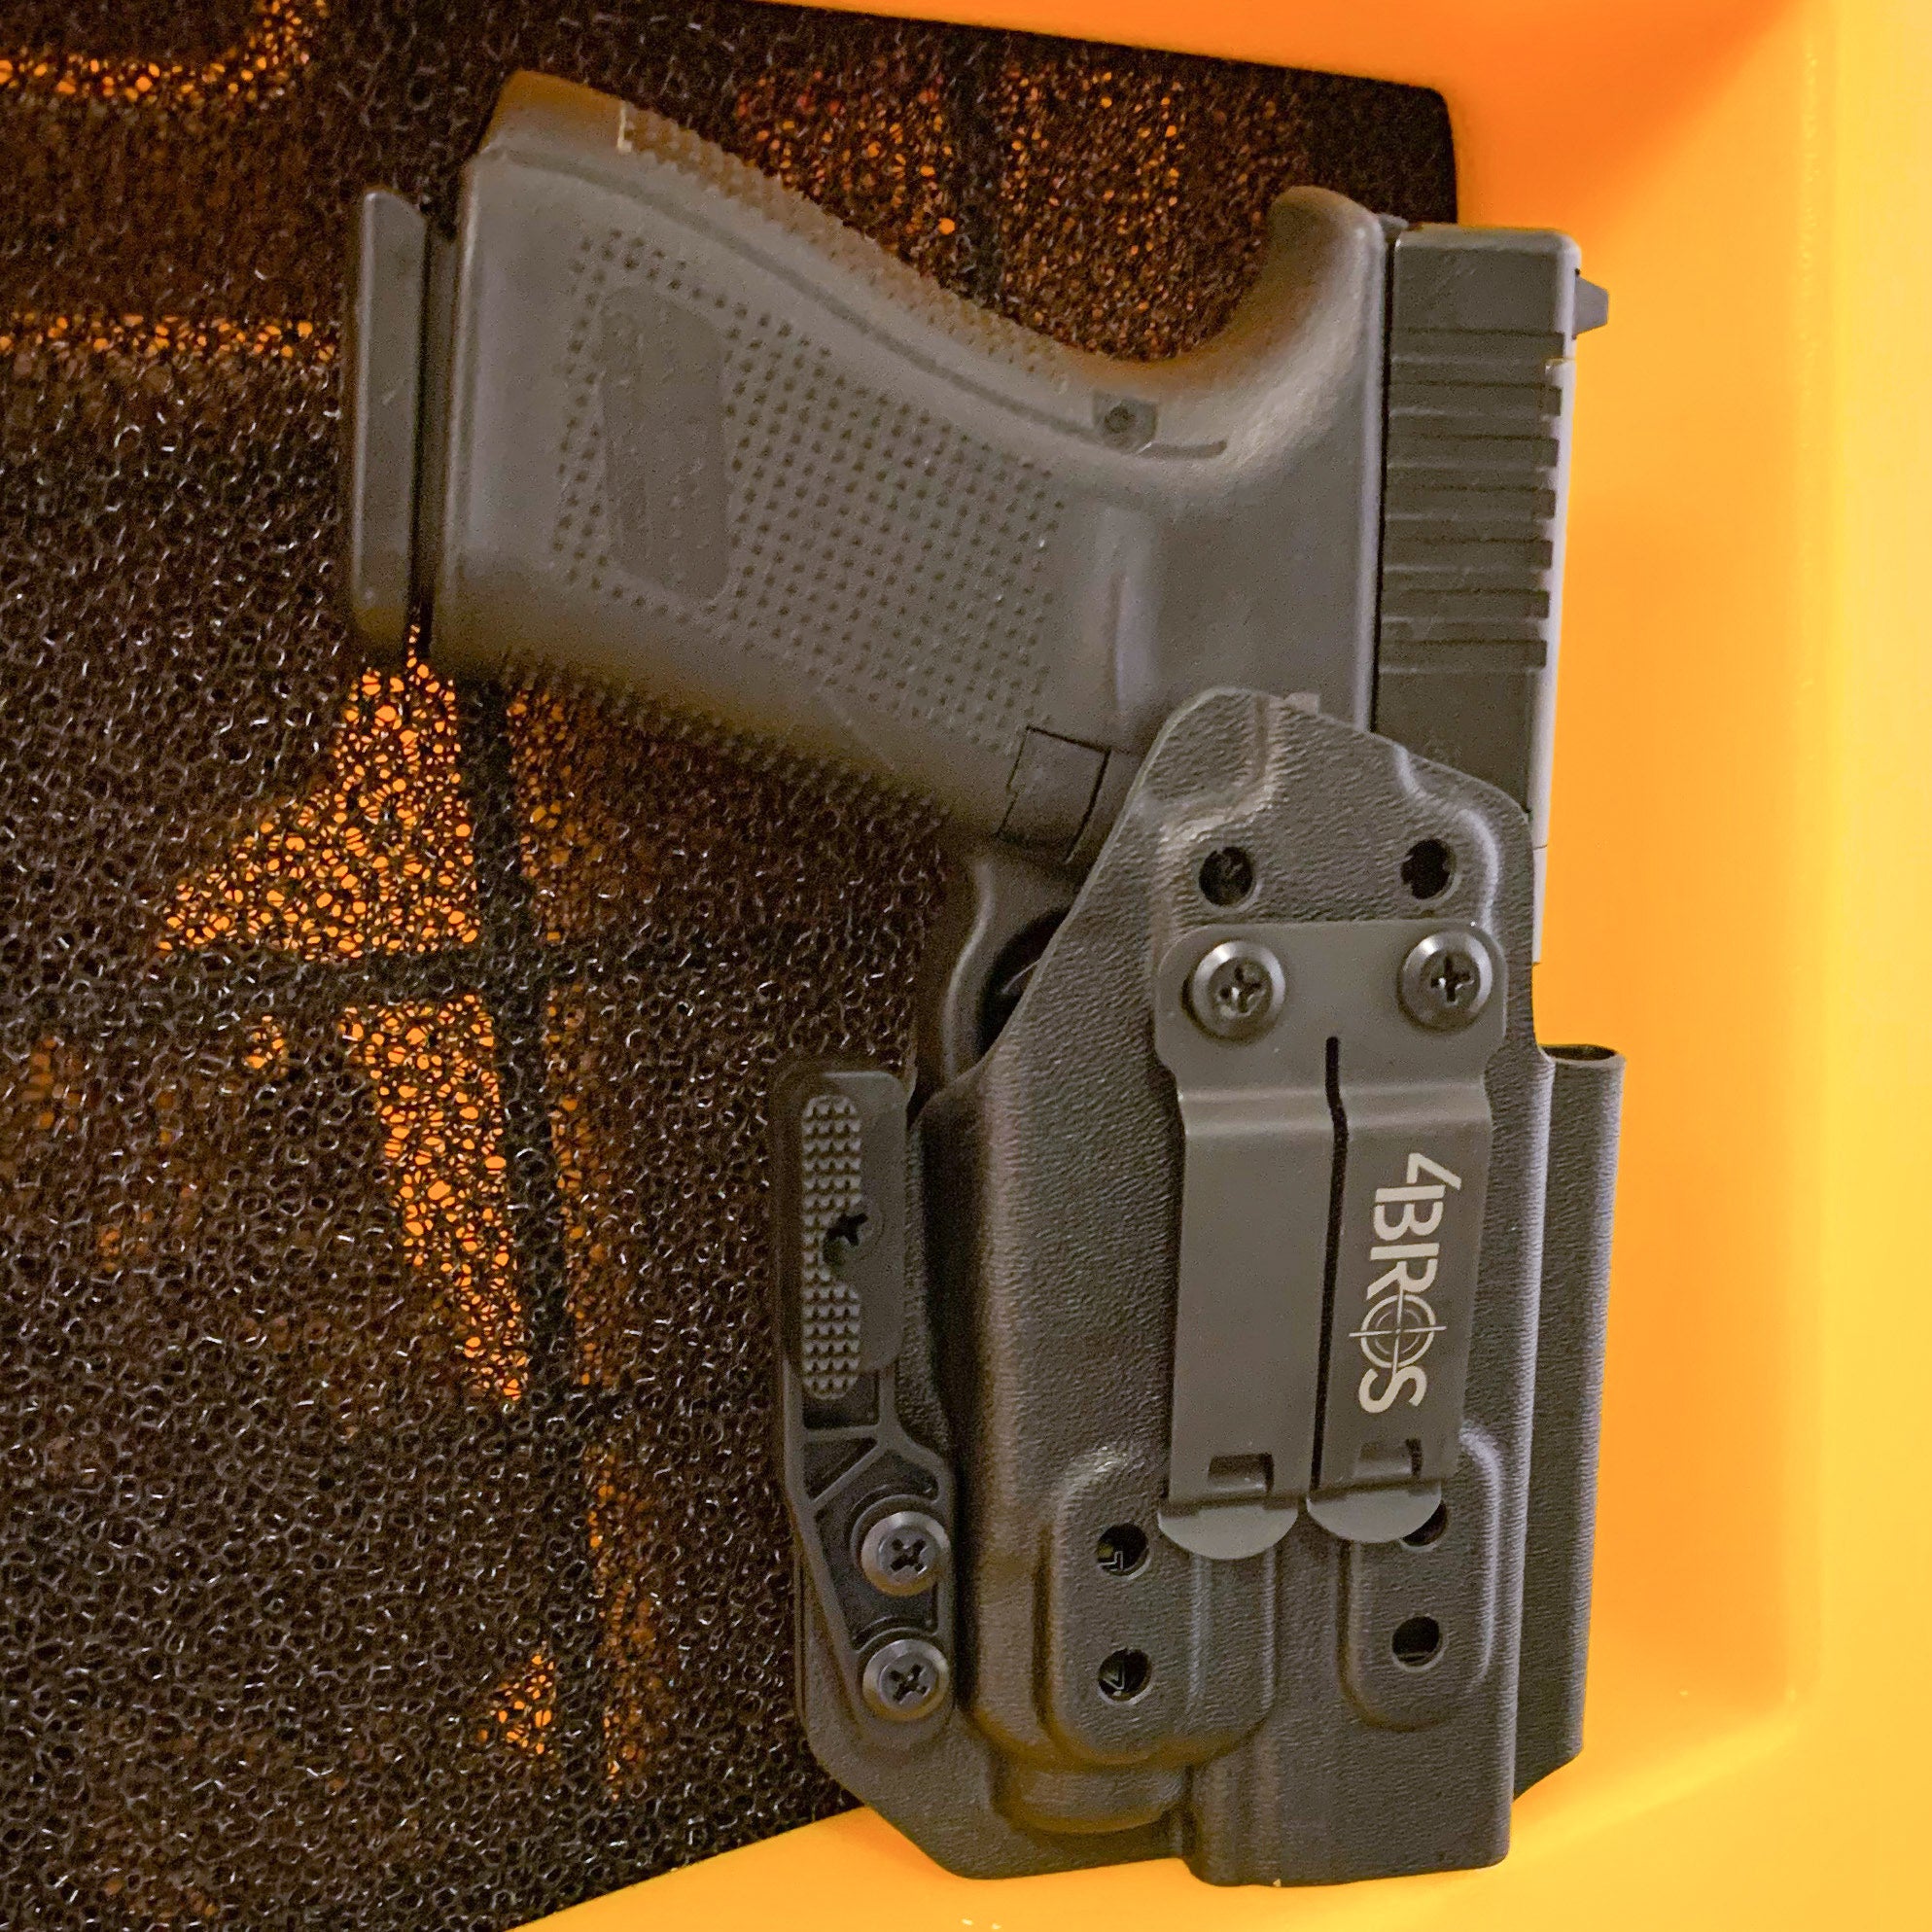 Inside Waistband IWB AIWB Appendix Kydex holster designed to fit the Glock 19, 23, 32, 19X, or 45 with the Streamlight TLR-7 or TLR-7A light. Adjustable retention, Open Muzzle, Cleared for red dot optics and suppressor height sight up to 3/8".  Proudly Made in the USA 